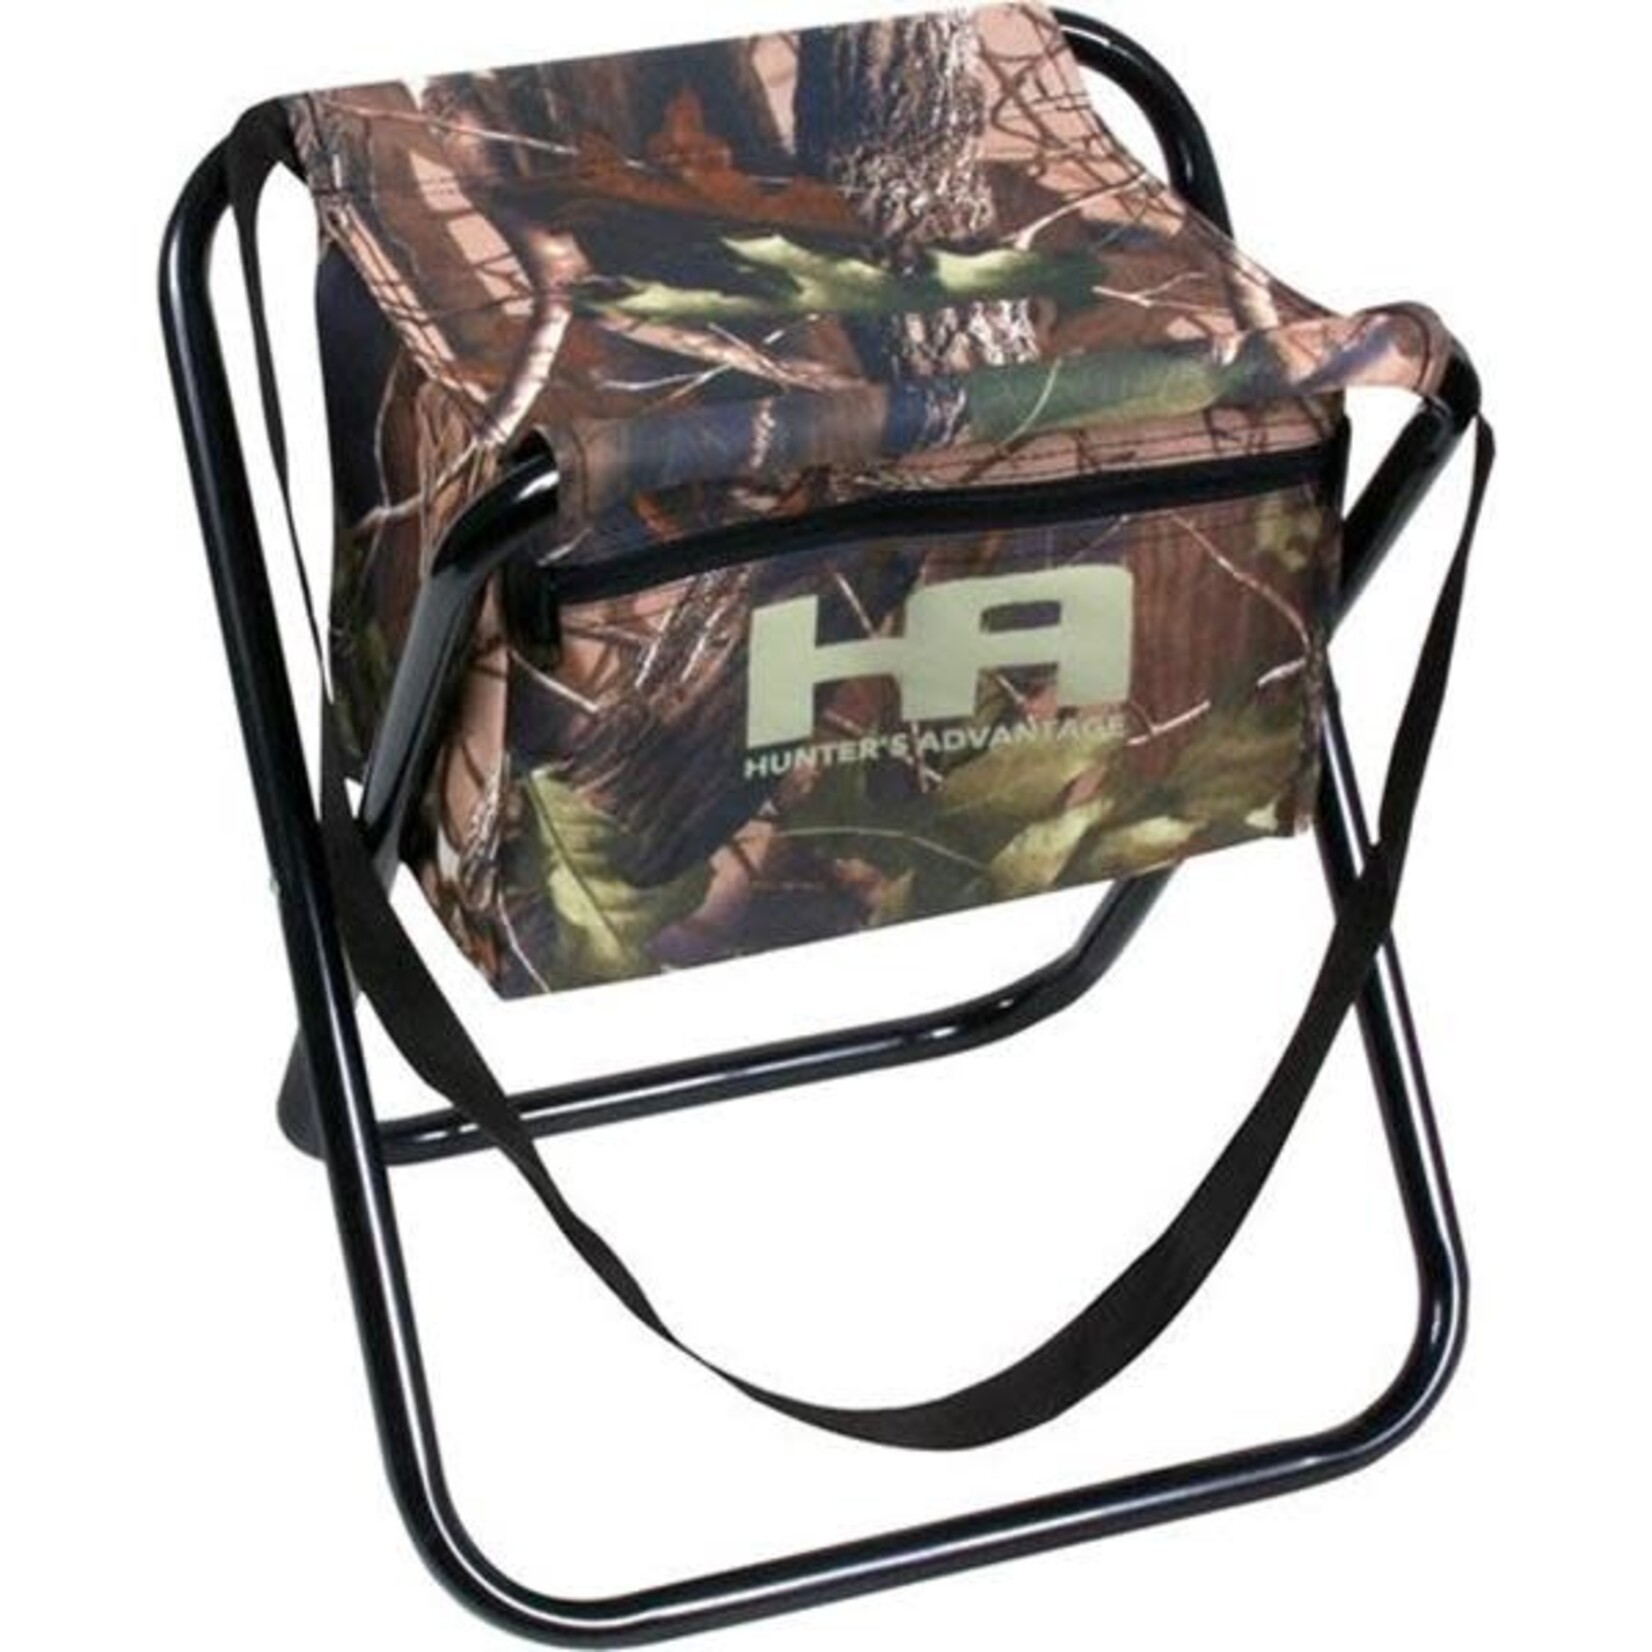 HQ OUTFITTERS Banc Pliant Hq Outfitters Camouflage